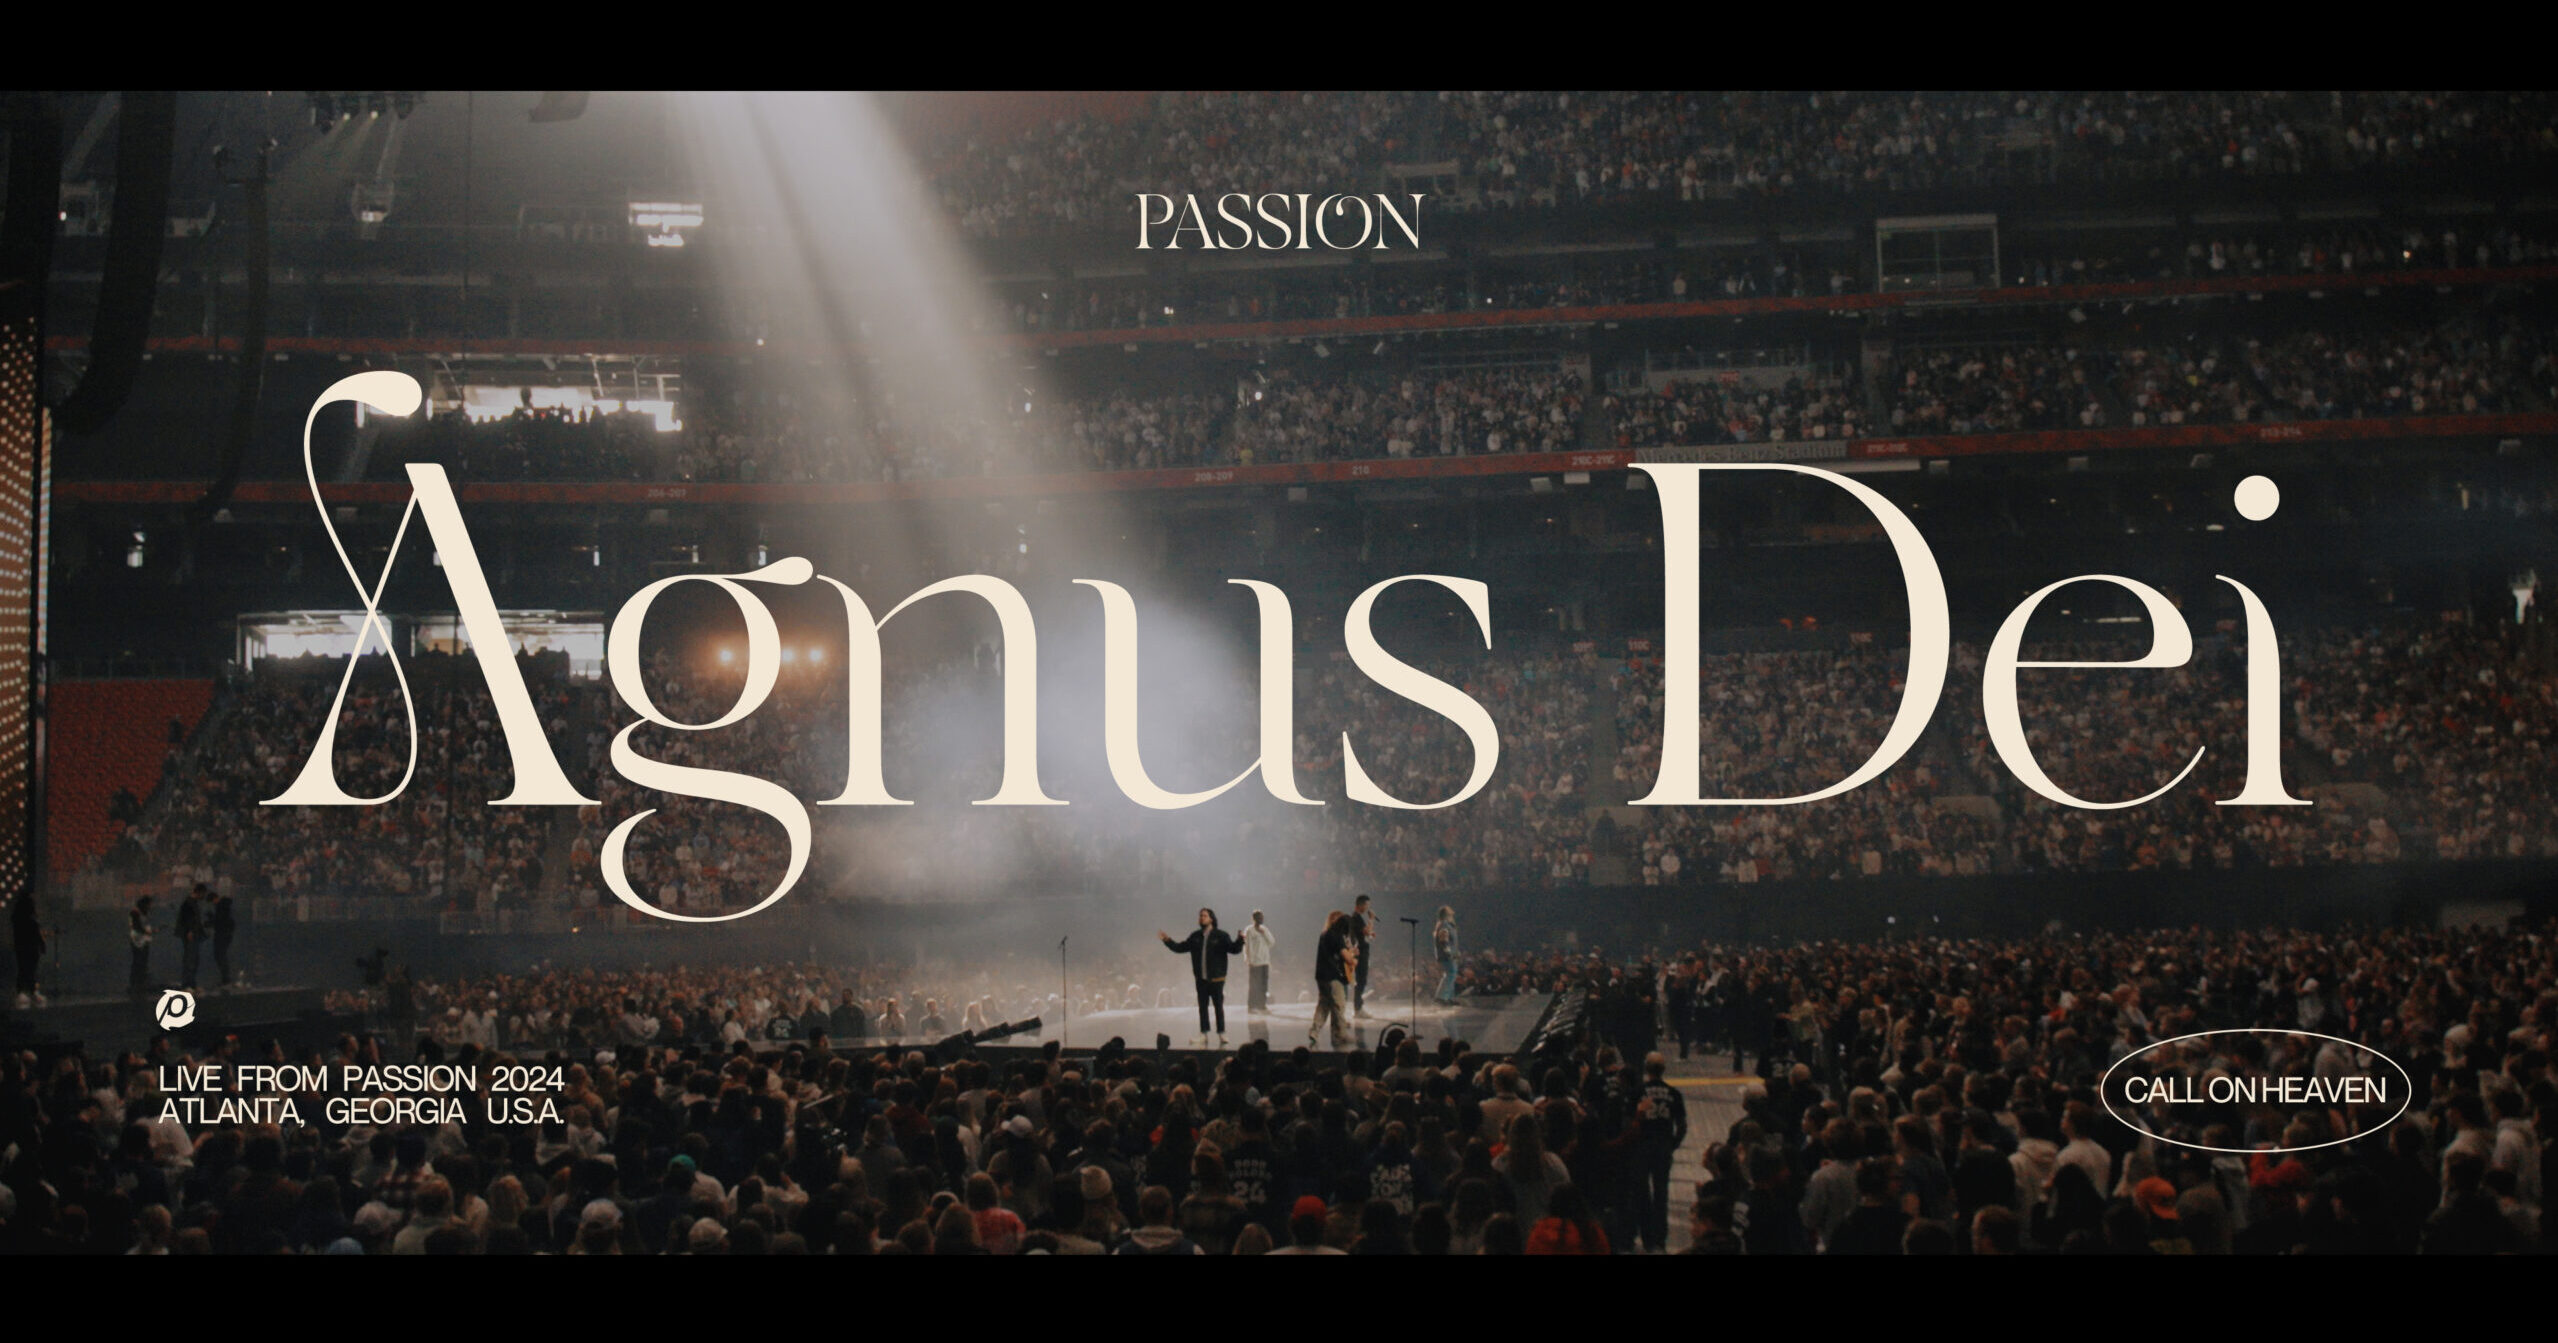 Passion, Kristian Stanfill Agnus Dei (Live From Passion 2024)